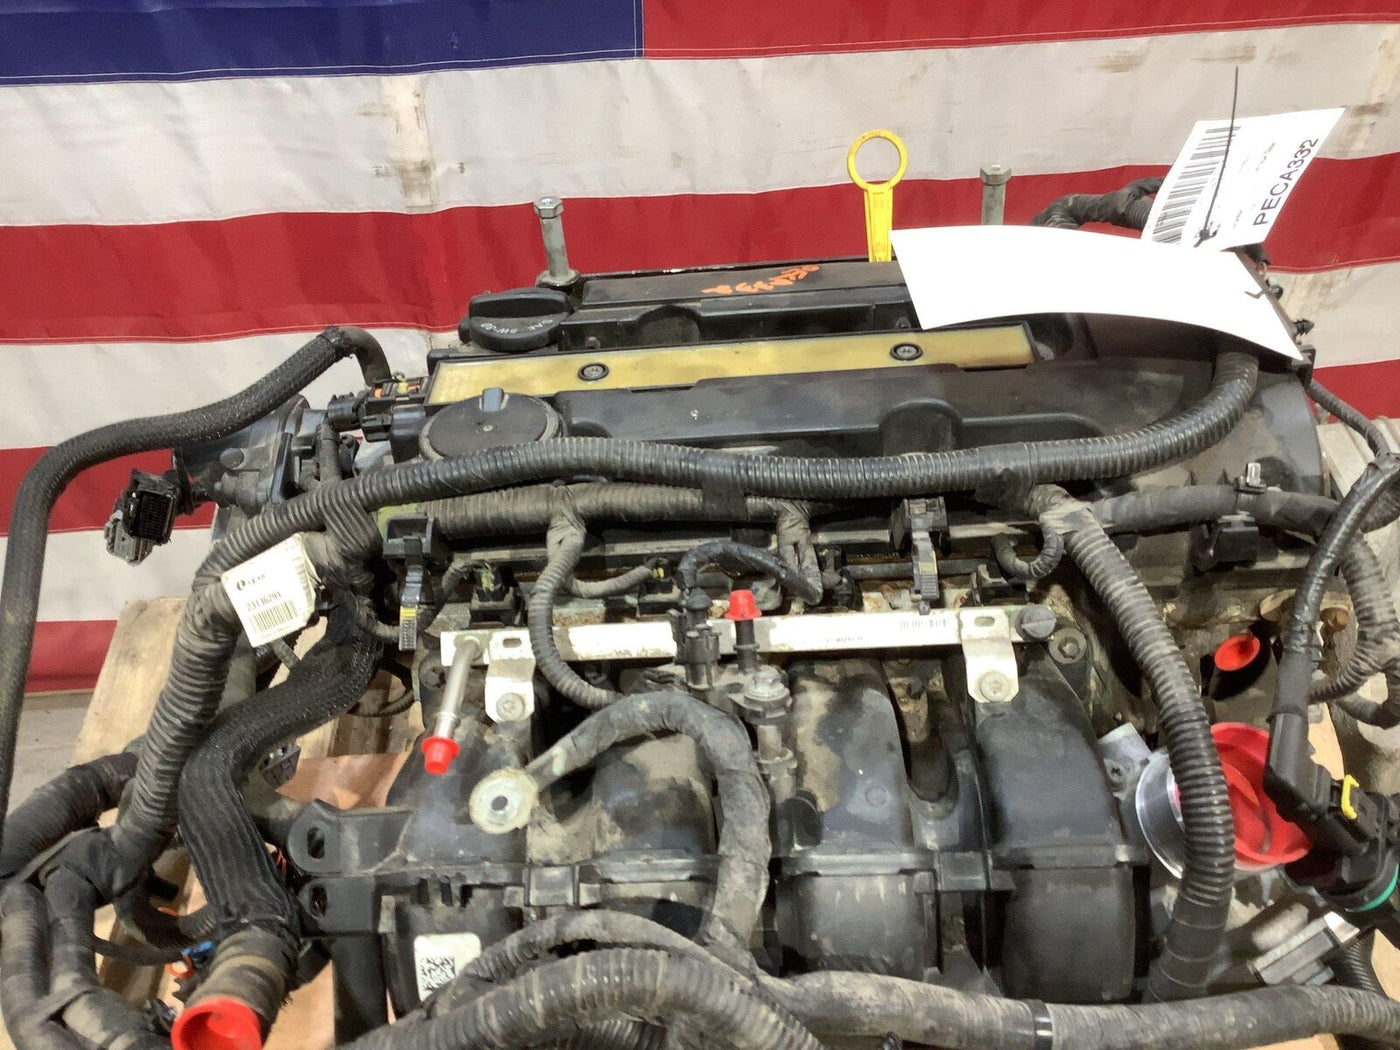 14-16 Cadillac ELR 1.4L Range Extending Engine W/ Accessories (Untested) 123K